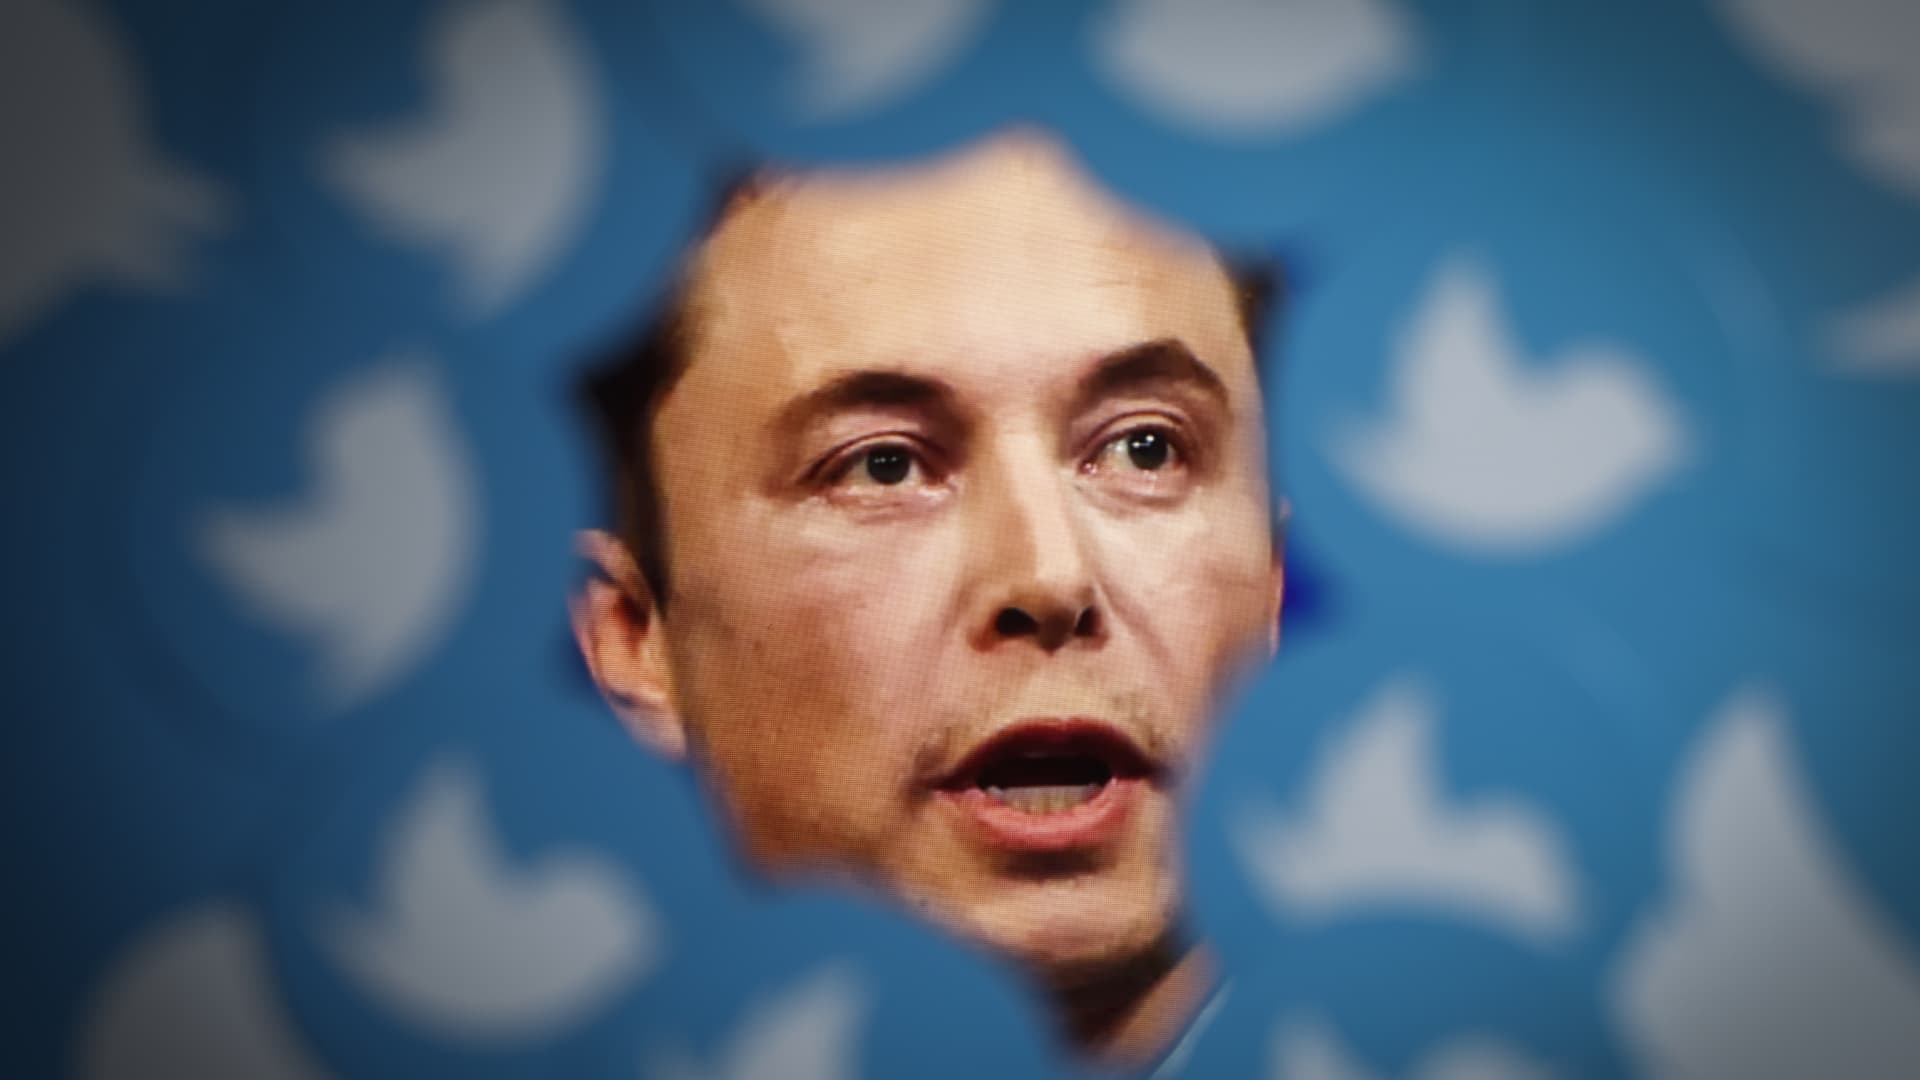 SpaceX, Tesla, and Boring Company execs are helping Elon Musk at Twitter, records reveal Auto Recent